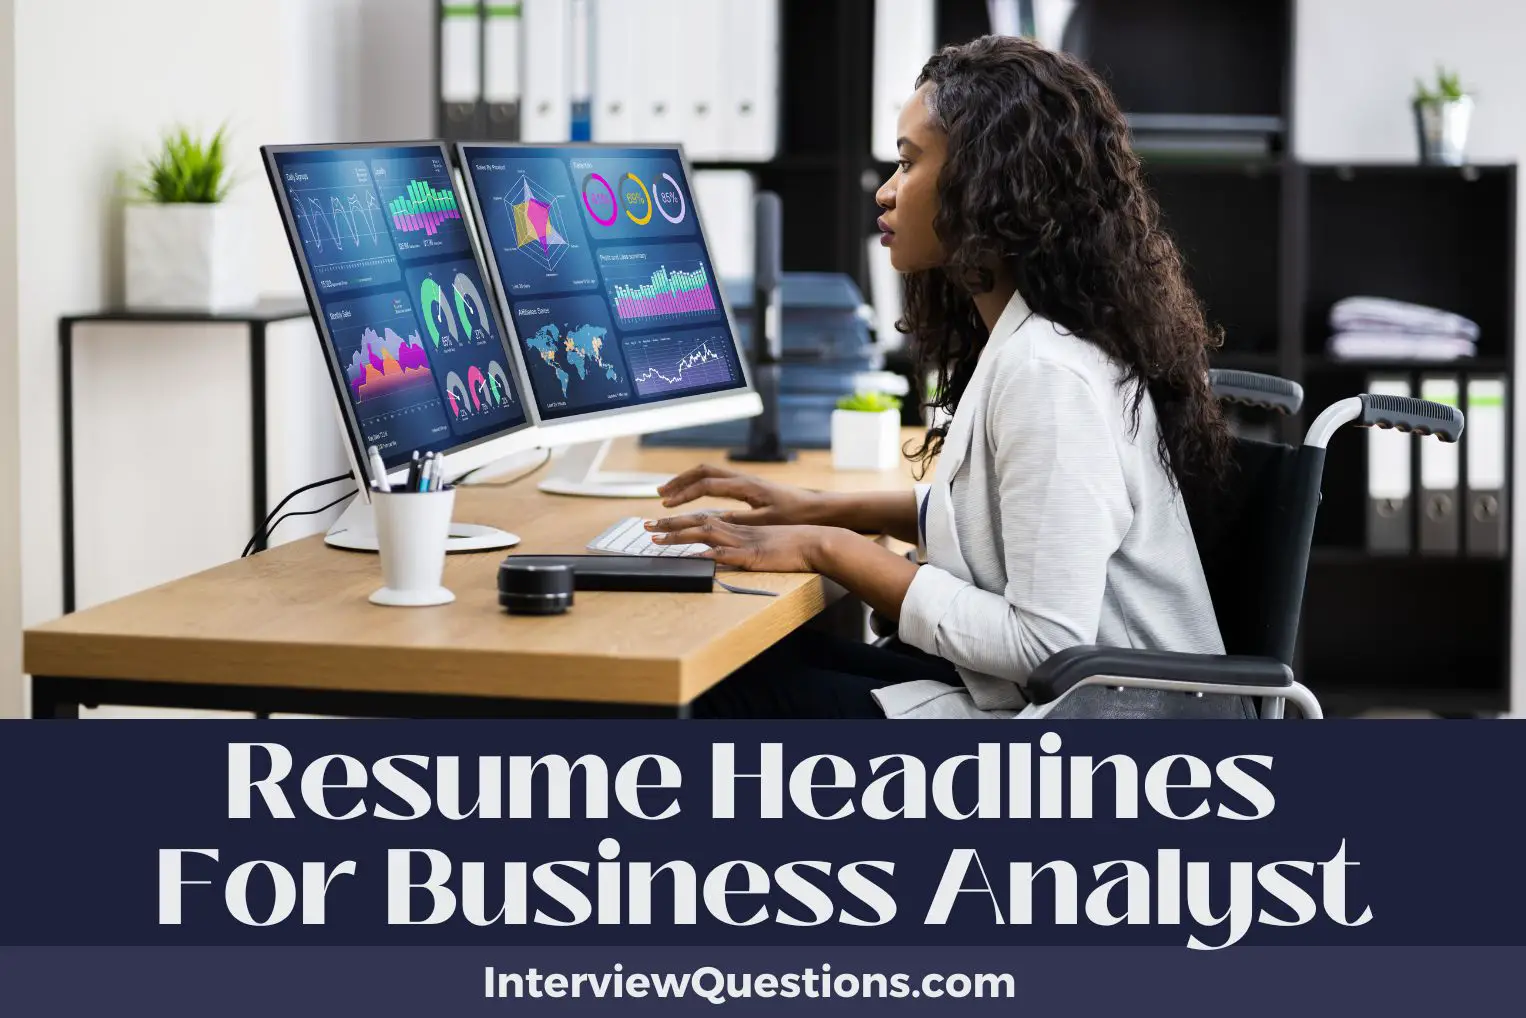 Resume Headlines For Business Analysts